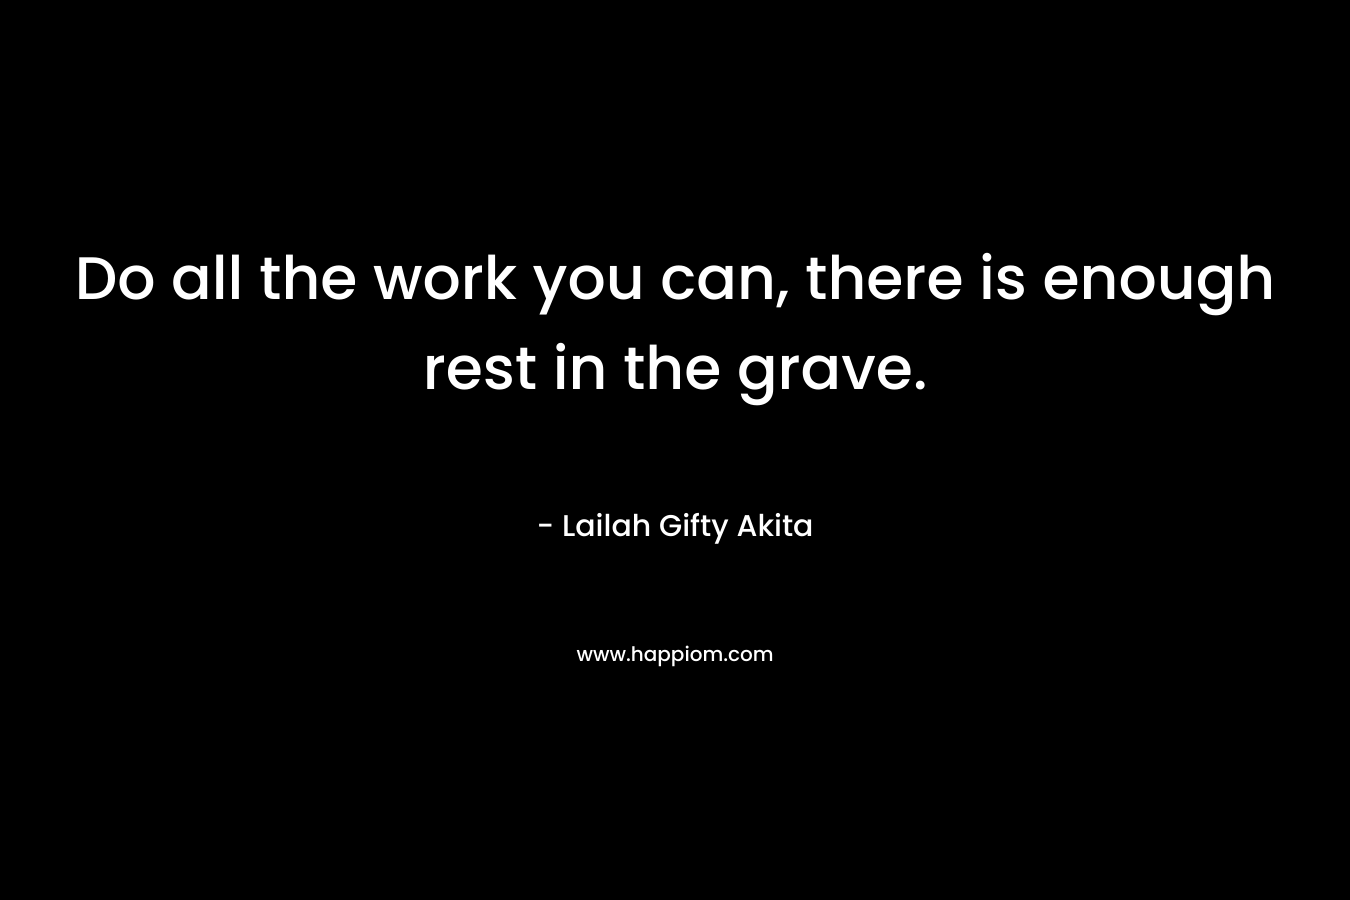 Do all the work you can, there is enough rest in the grave.